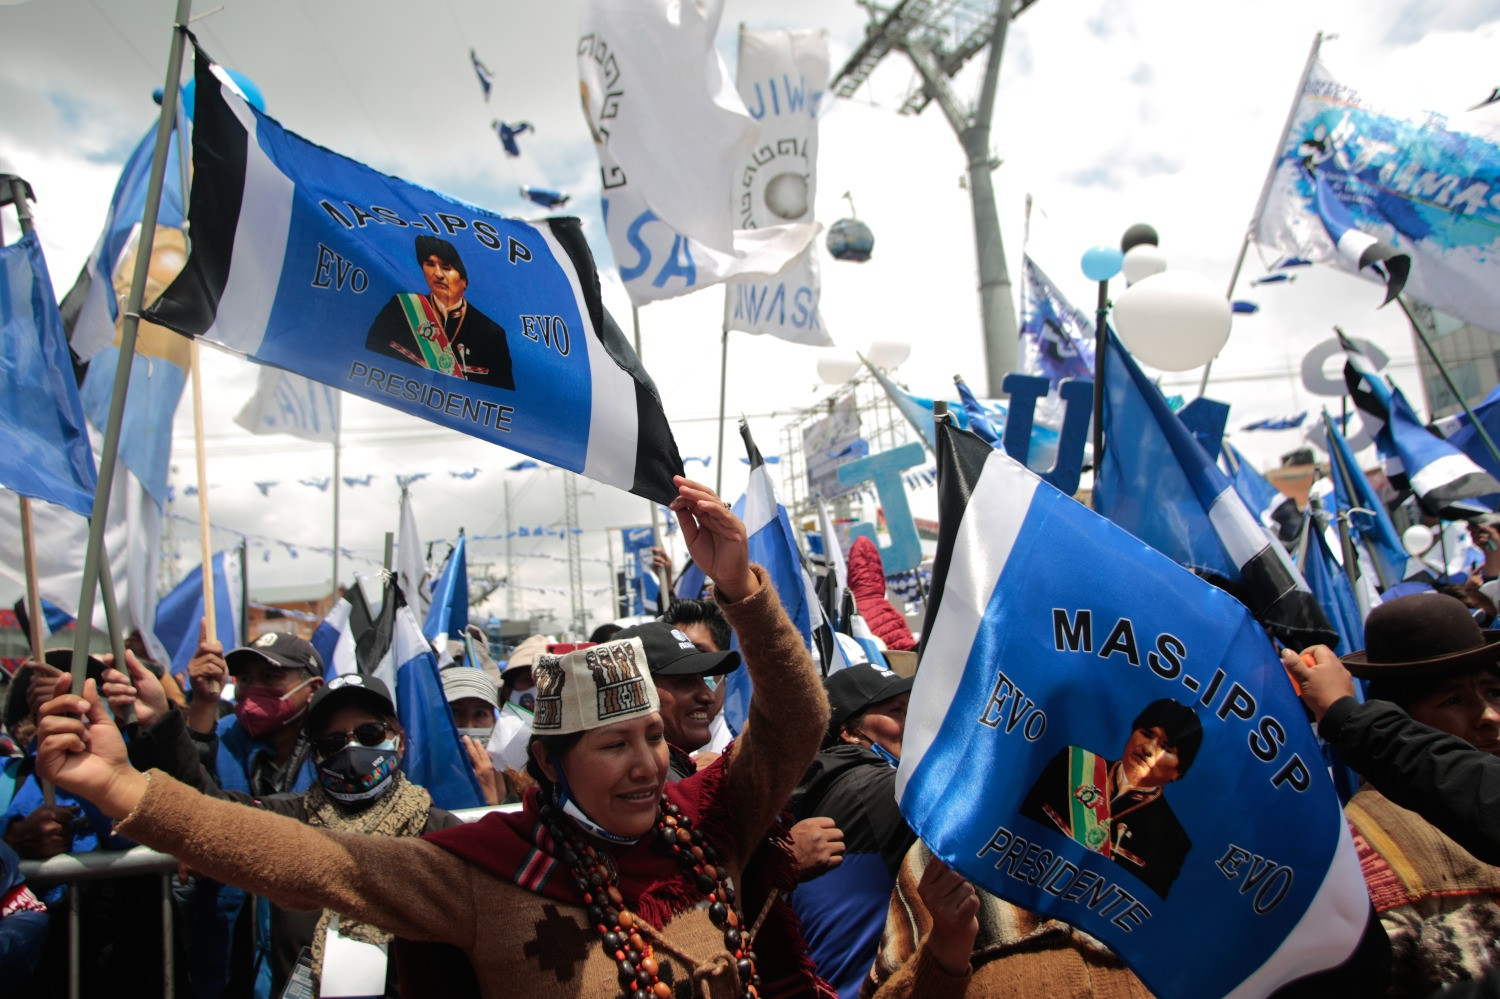 People holding flags in a rally